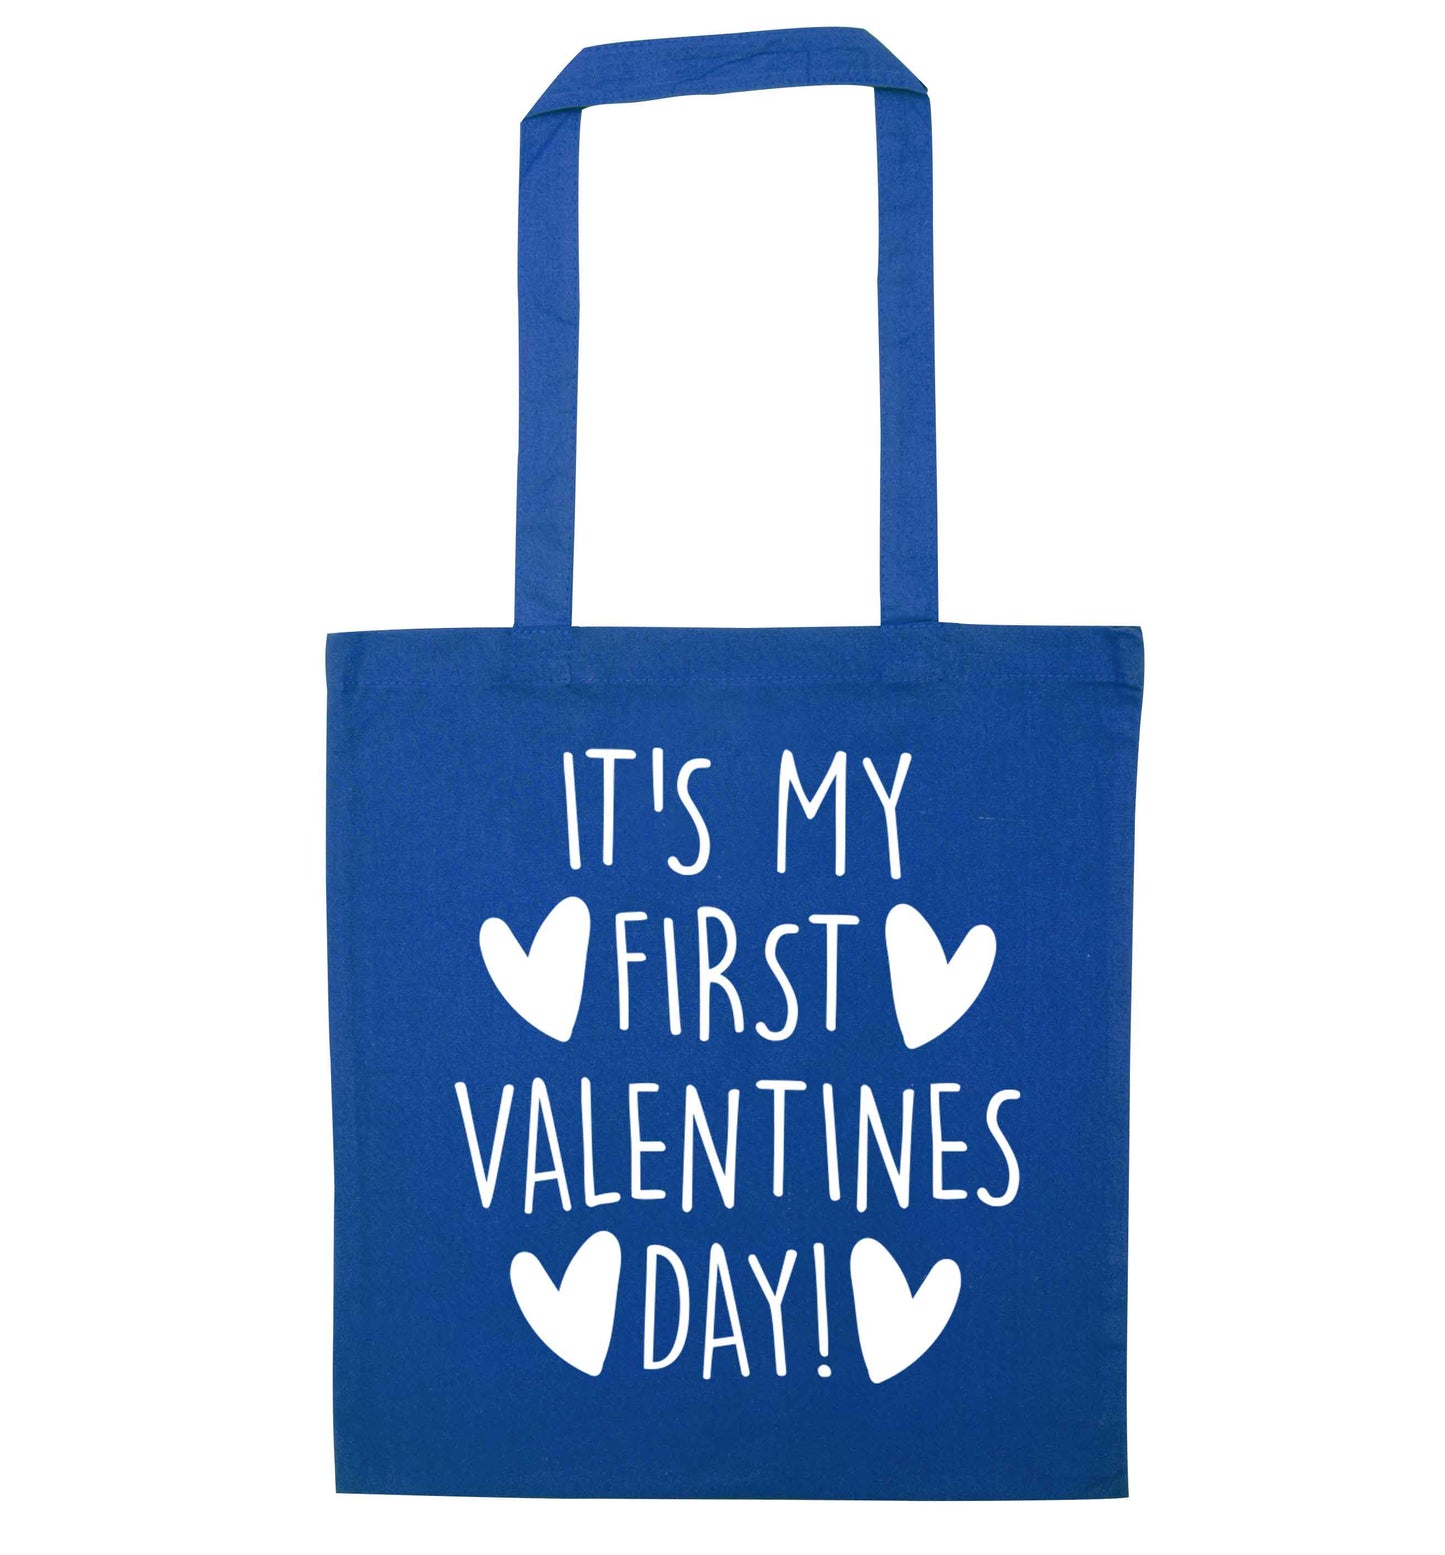 It's my first valentines day! blue tote bag